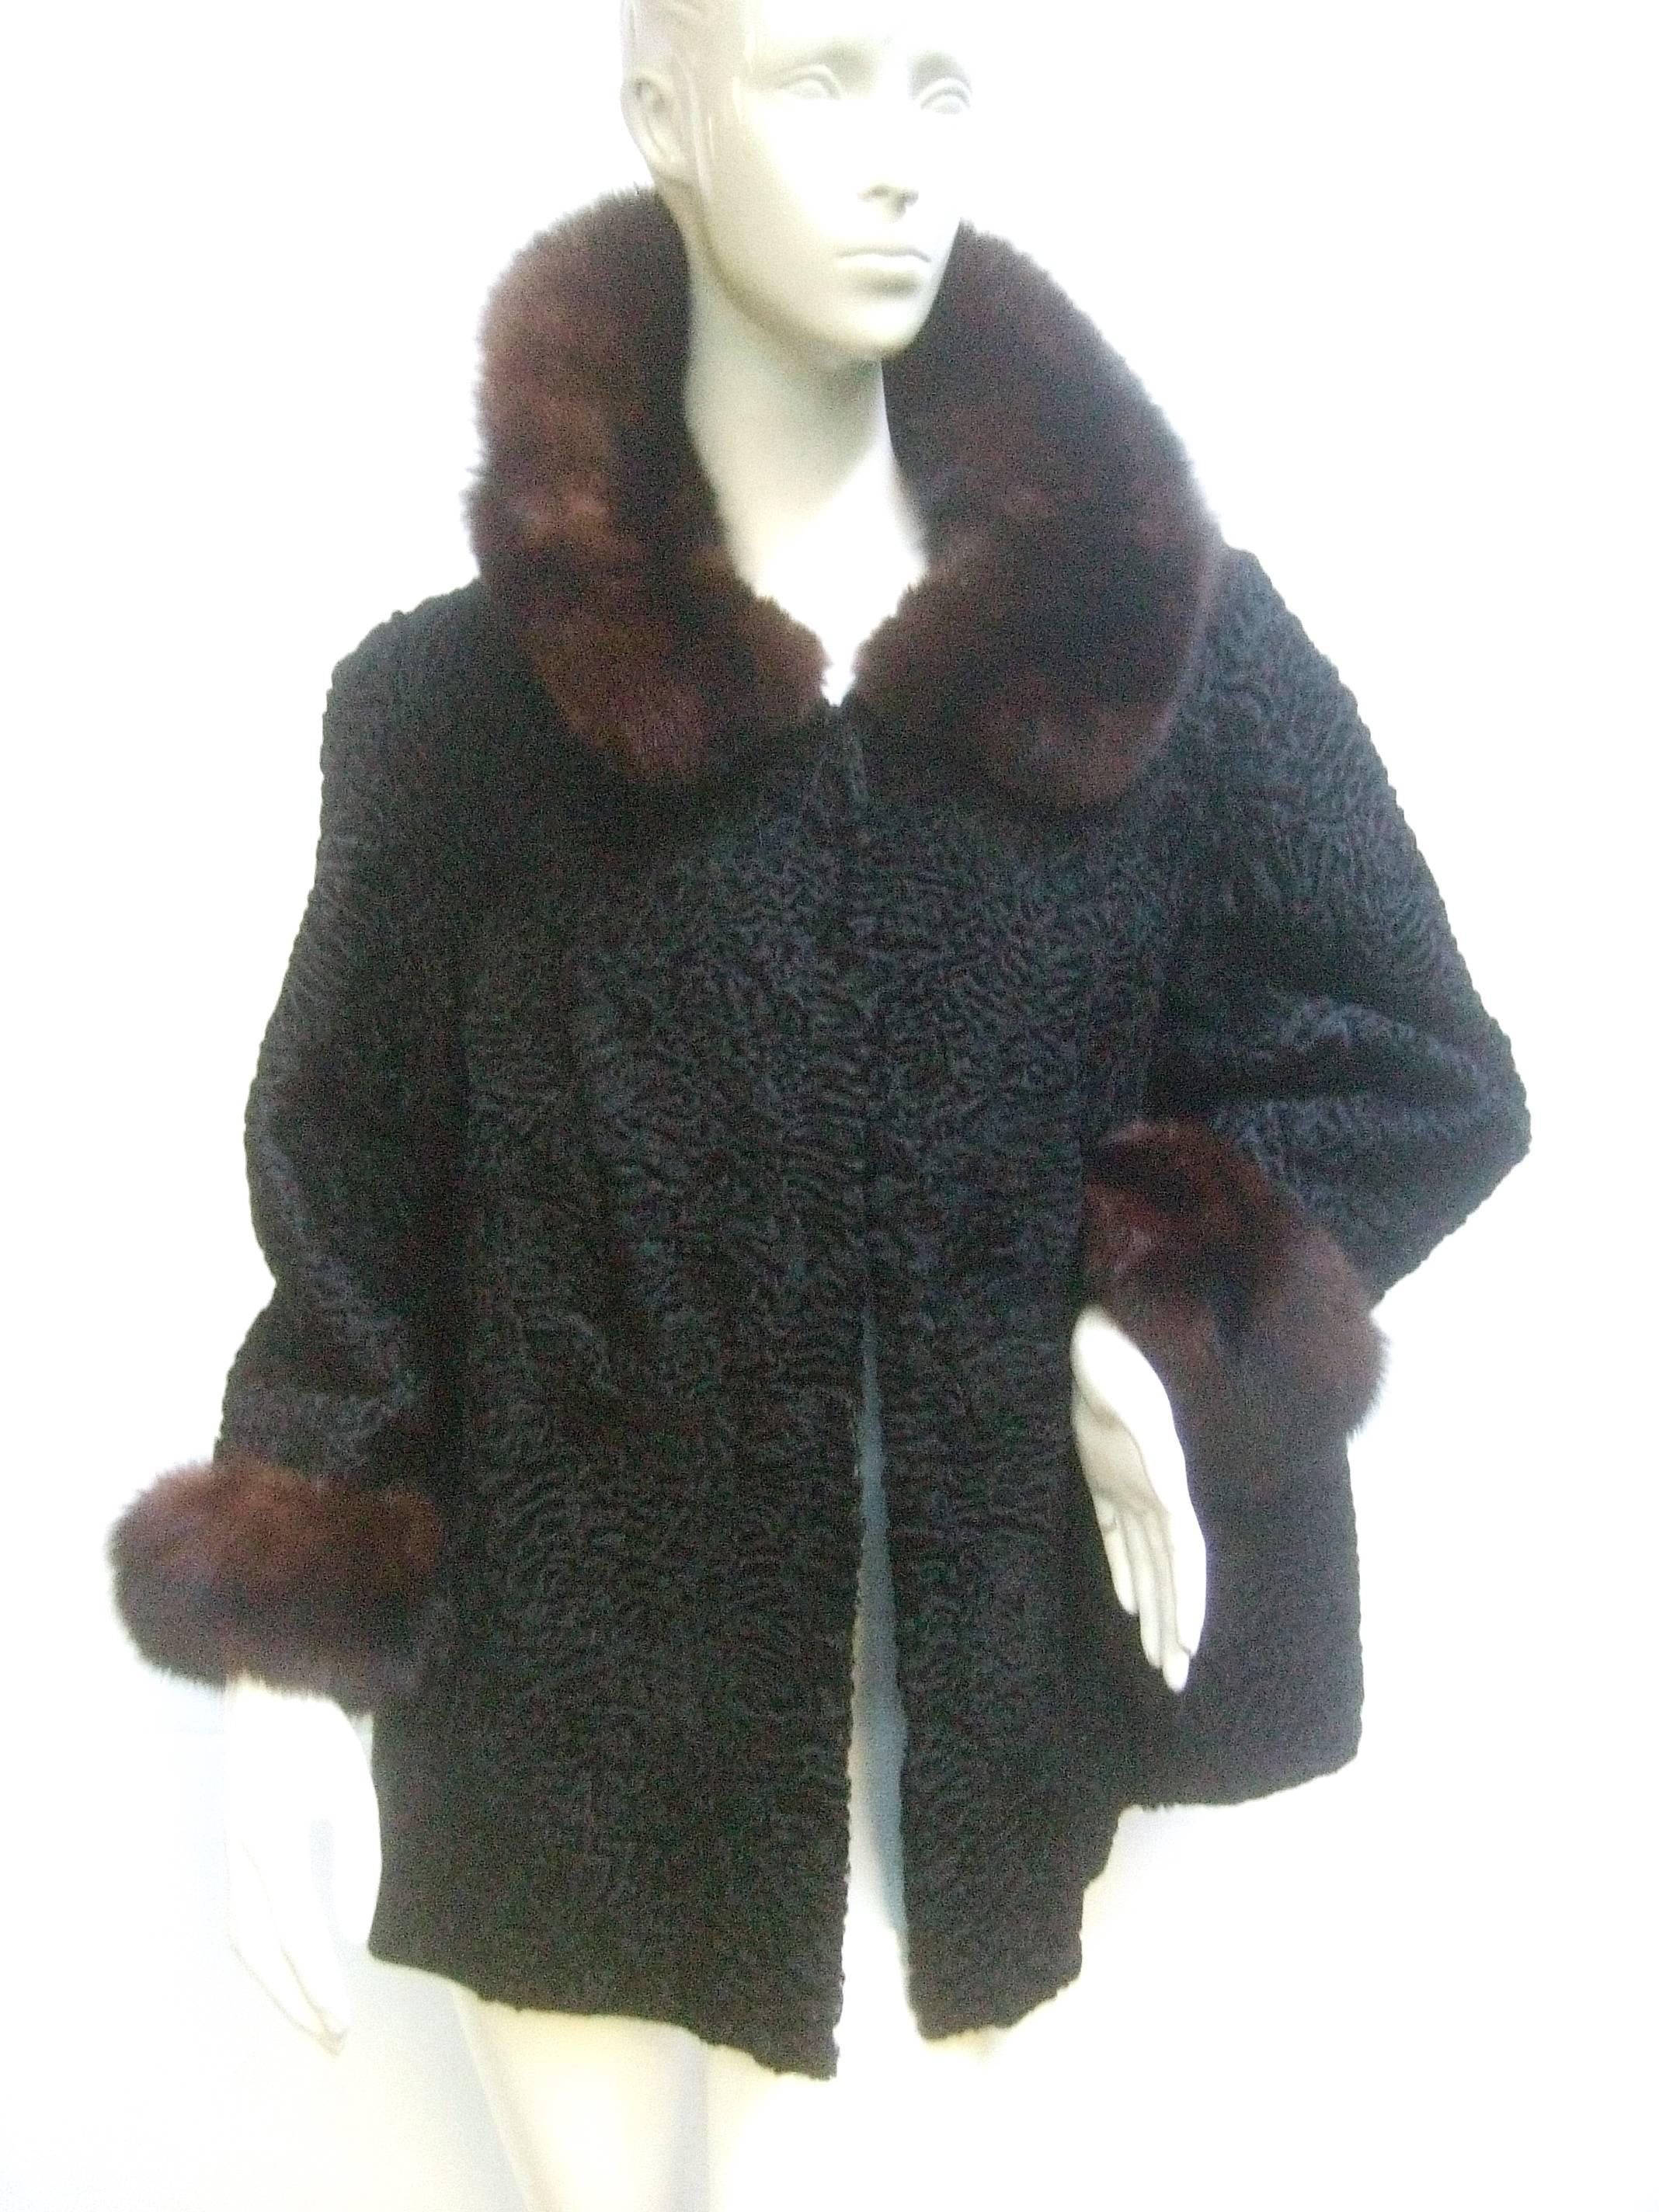 Schiaparelli Paris Luxurious sable trim astrakhan 3/4 length jacket c 1960
The chic retro jacket is designed with plush sable fur that frames
the collar and circles the sleeve cuffs 

The ebony black astrakhan fur has a soft luxurious texture
Lined